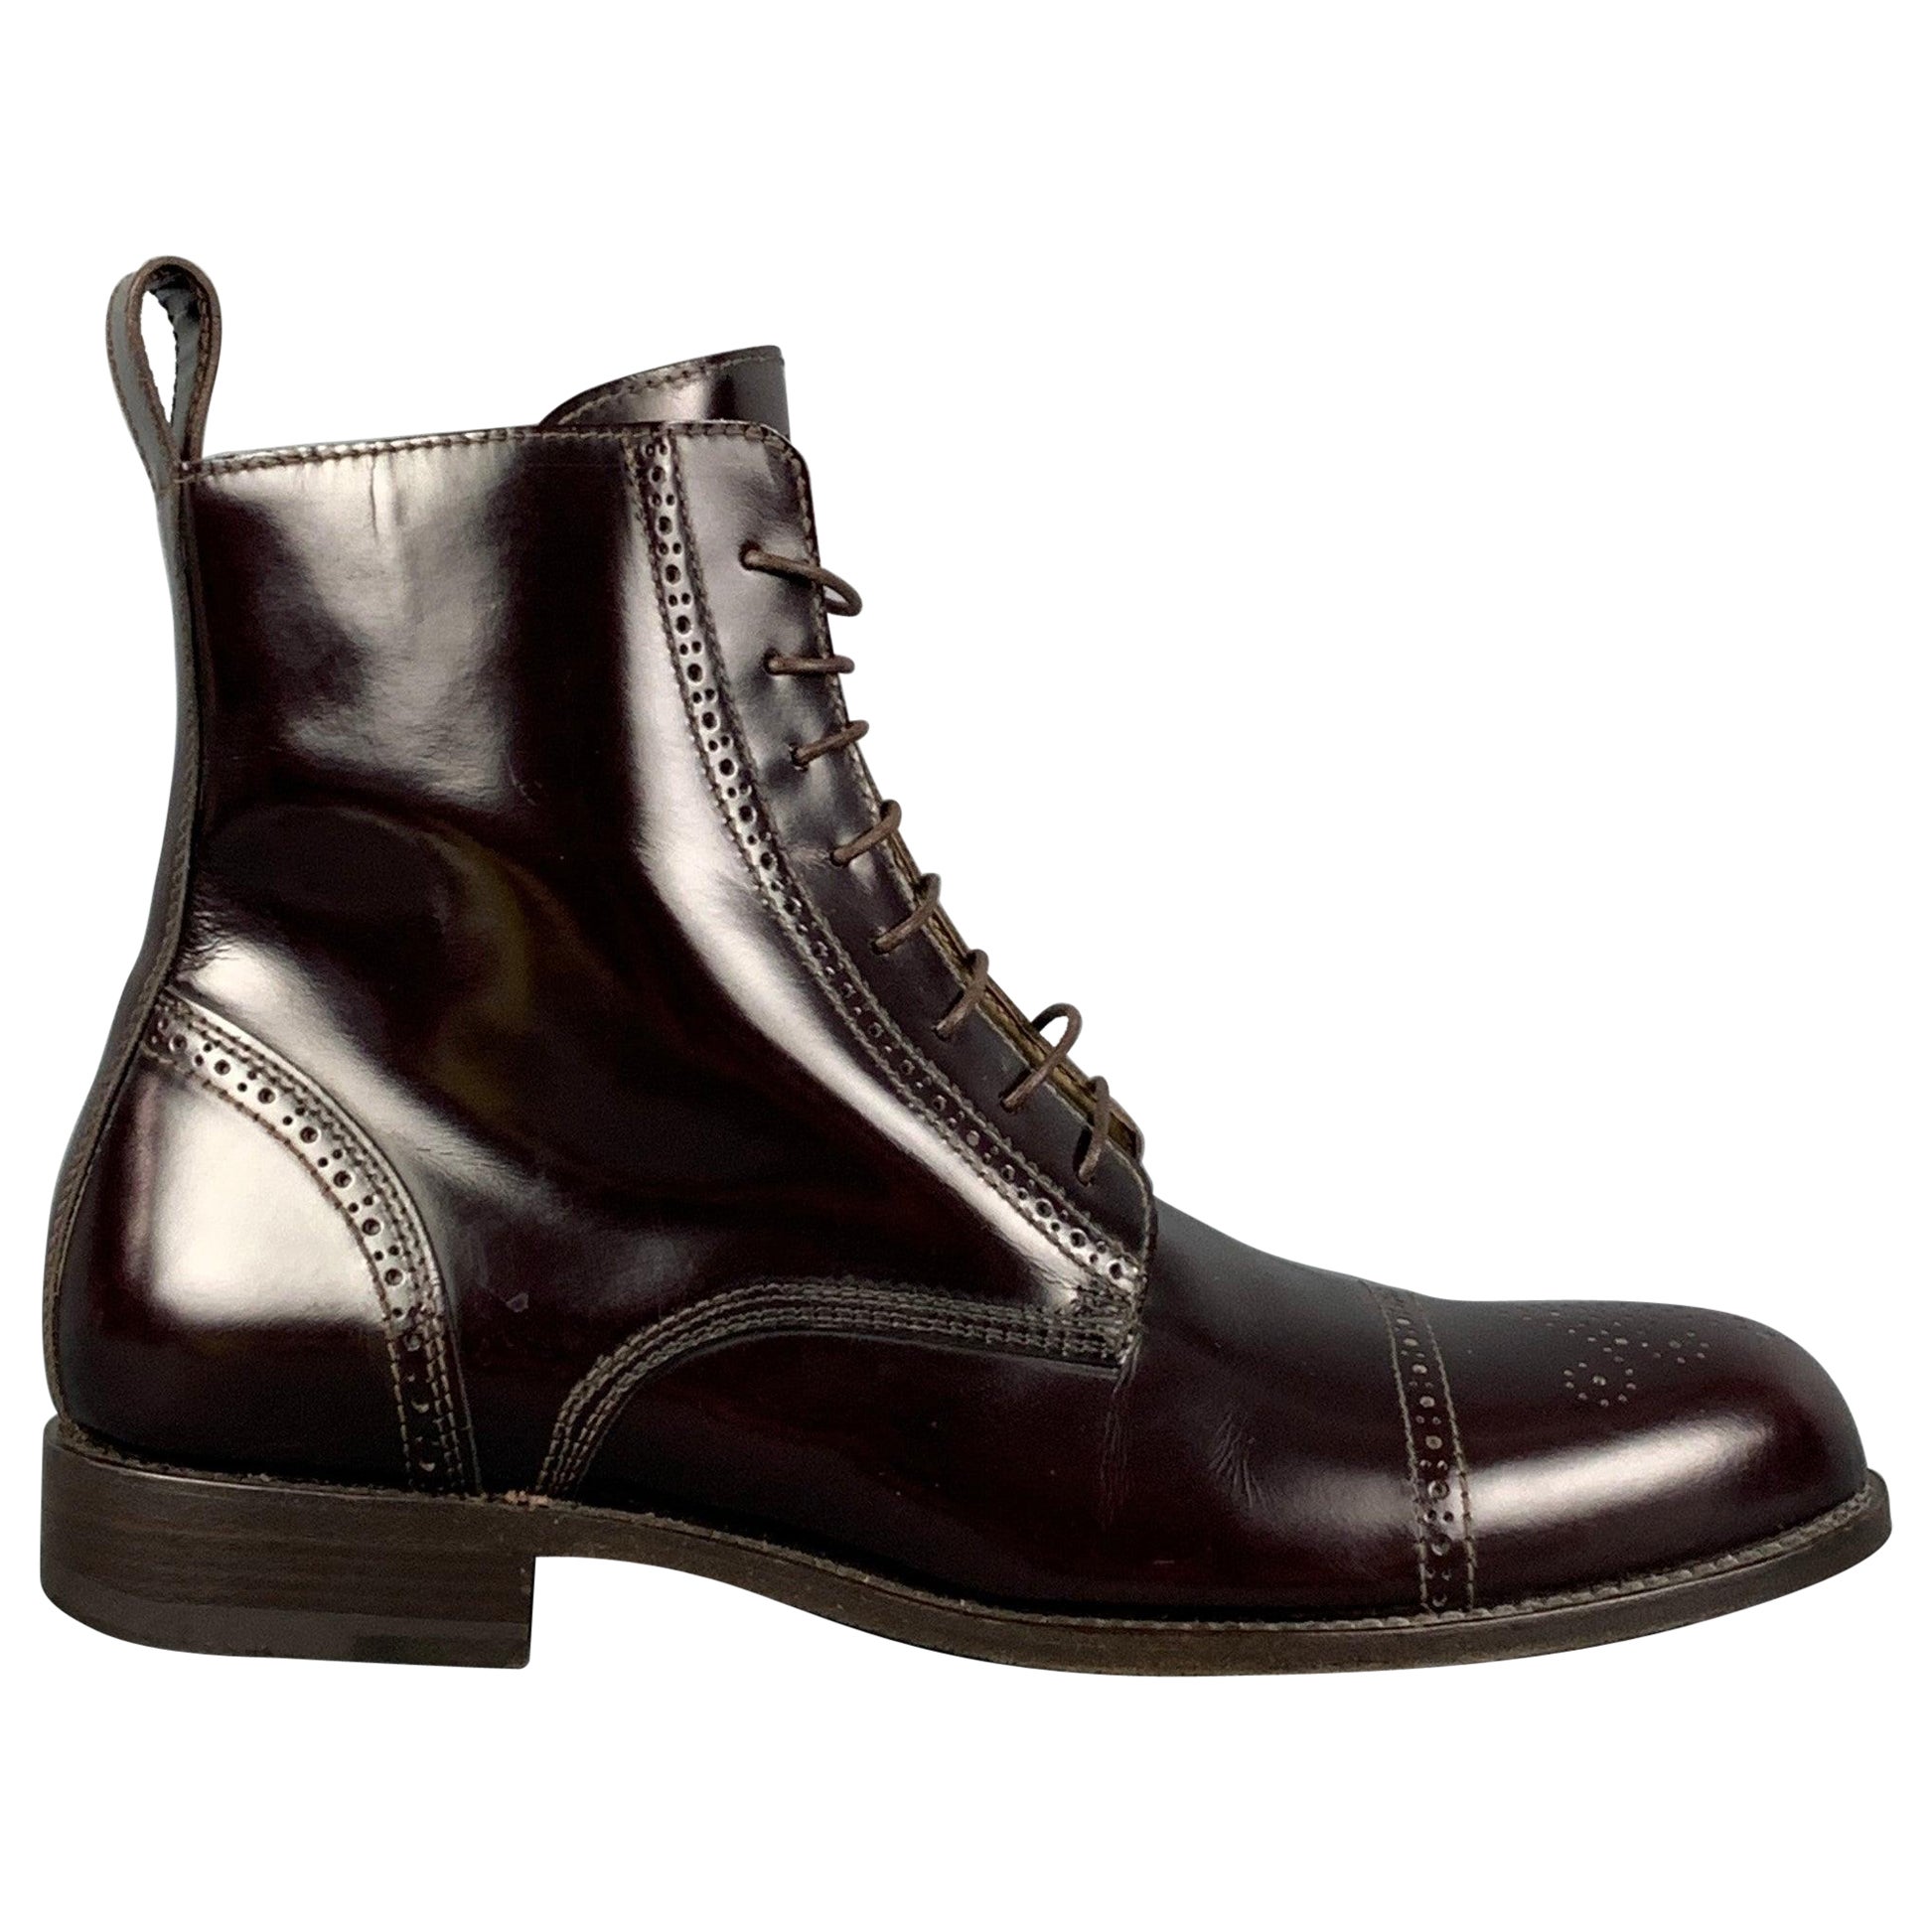 MARC JACOBS Size 9.5 Burgundy Perforated Leather Cap Toe Boots For Sale